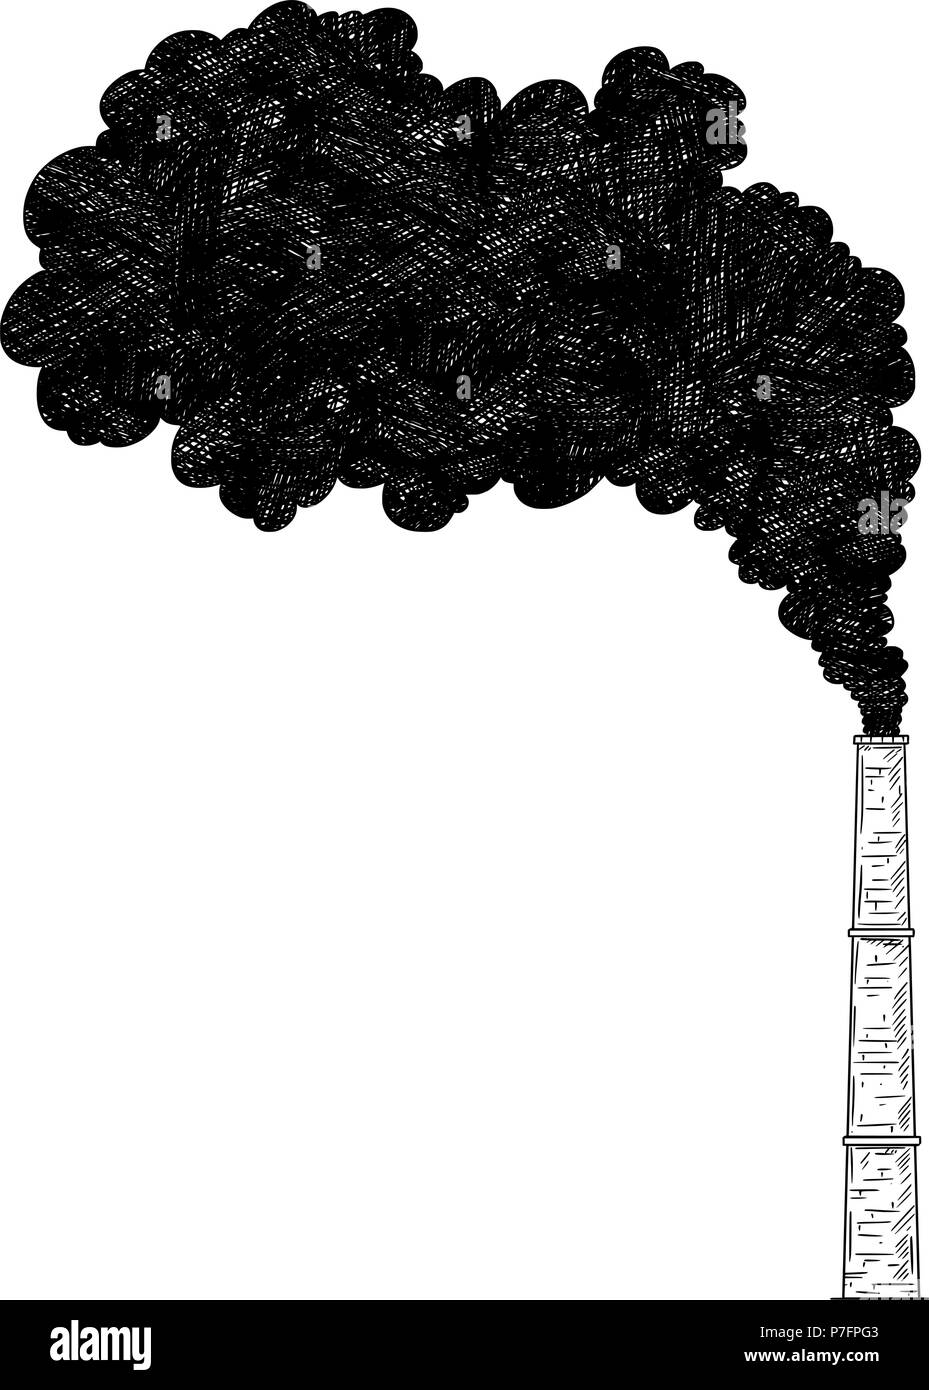 Vector Artistic Drawing Illustration of Smokestack, Industry or Factory Air Pollution Stock Vector